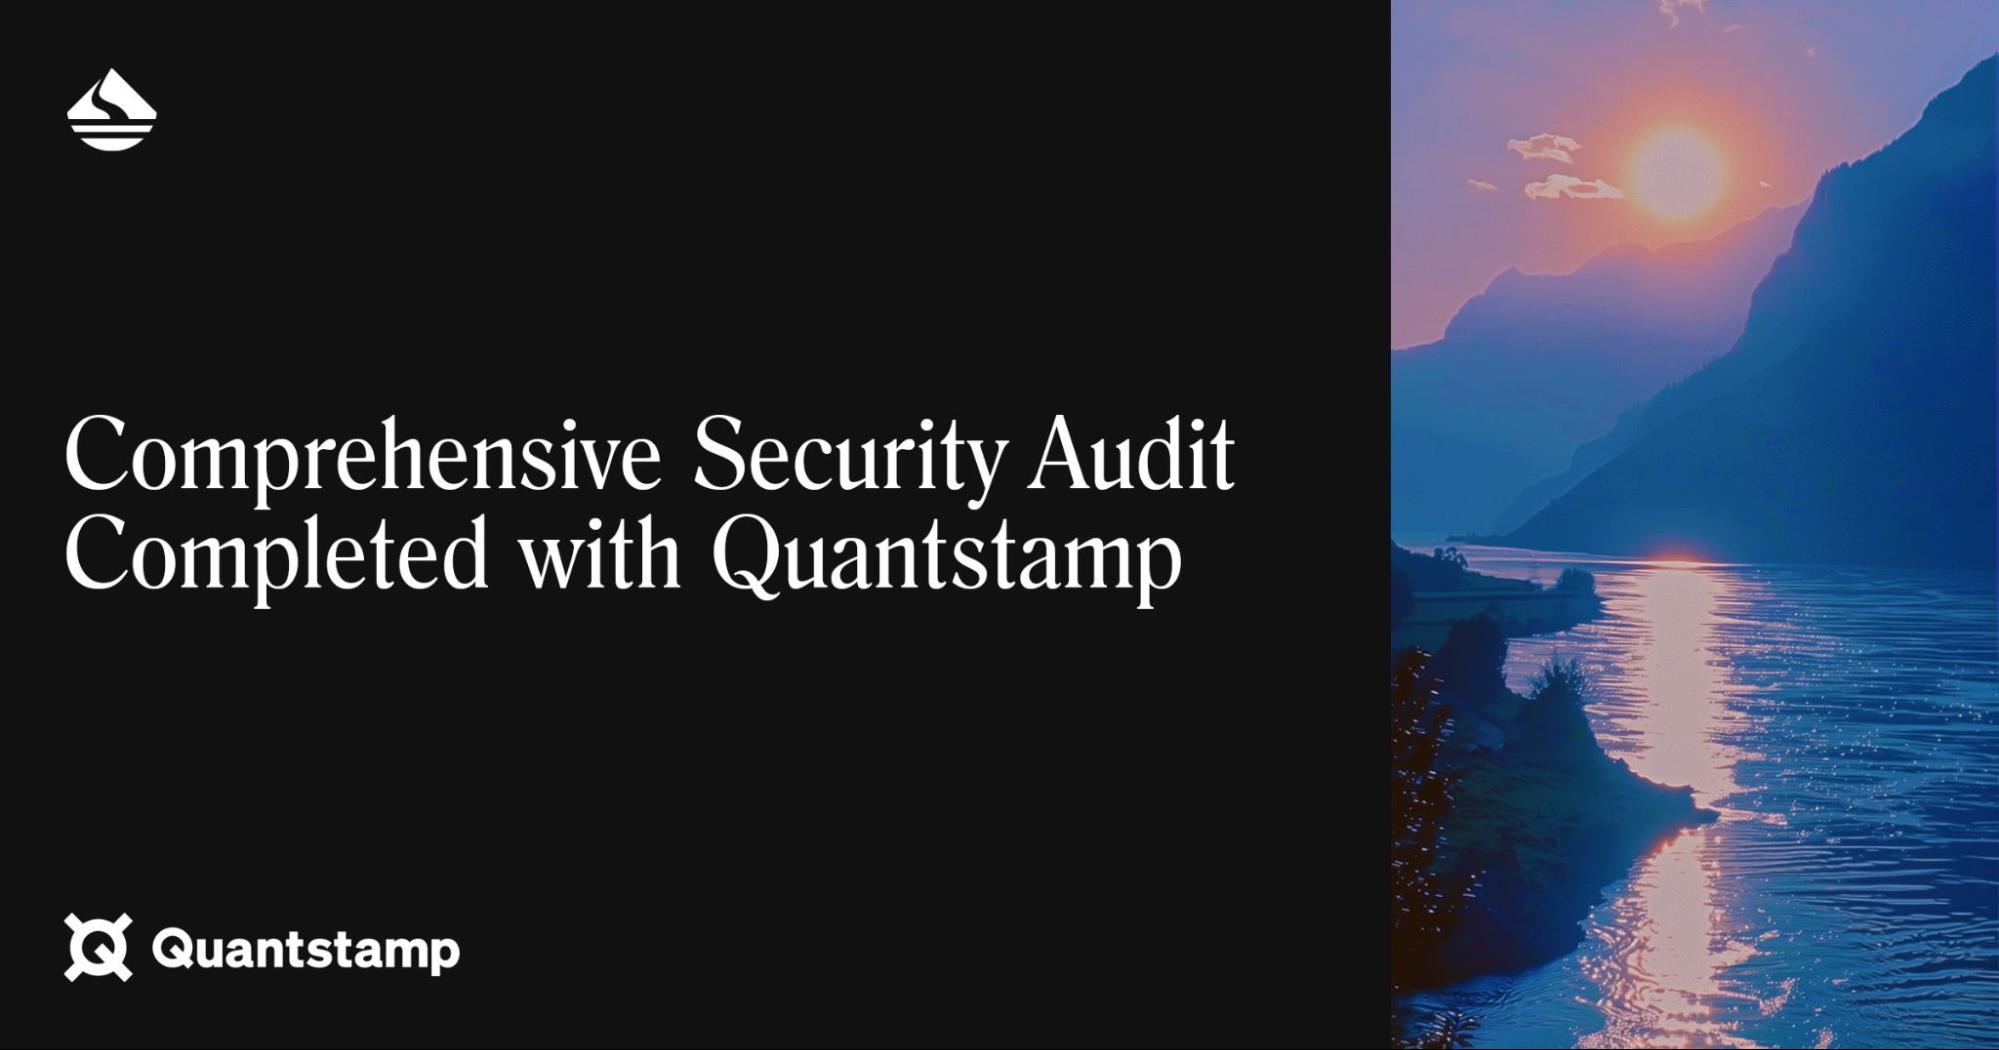 Comprehensive Security Audit Completed with Quantstamp